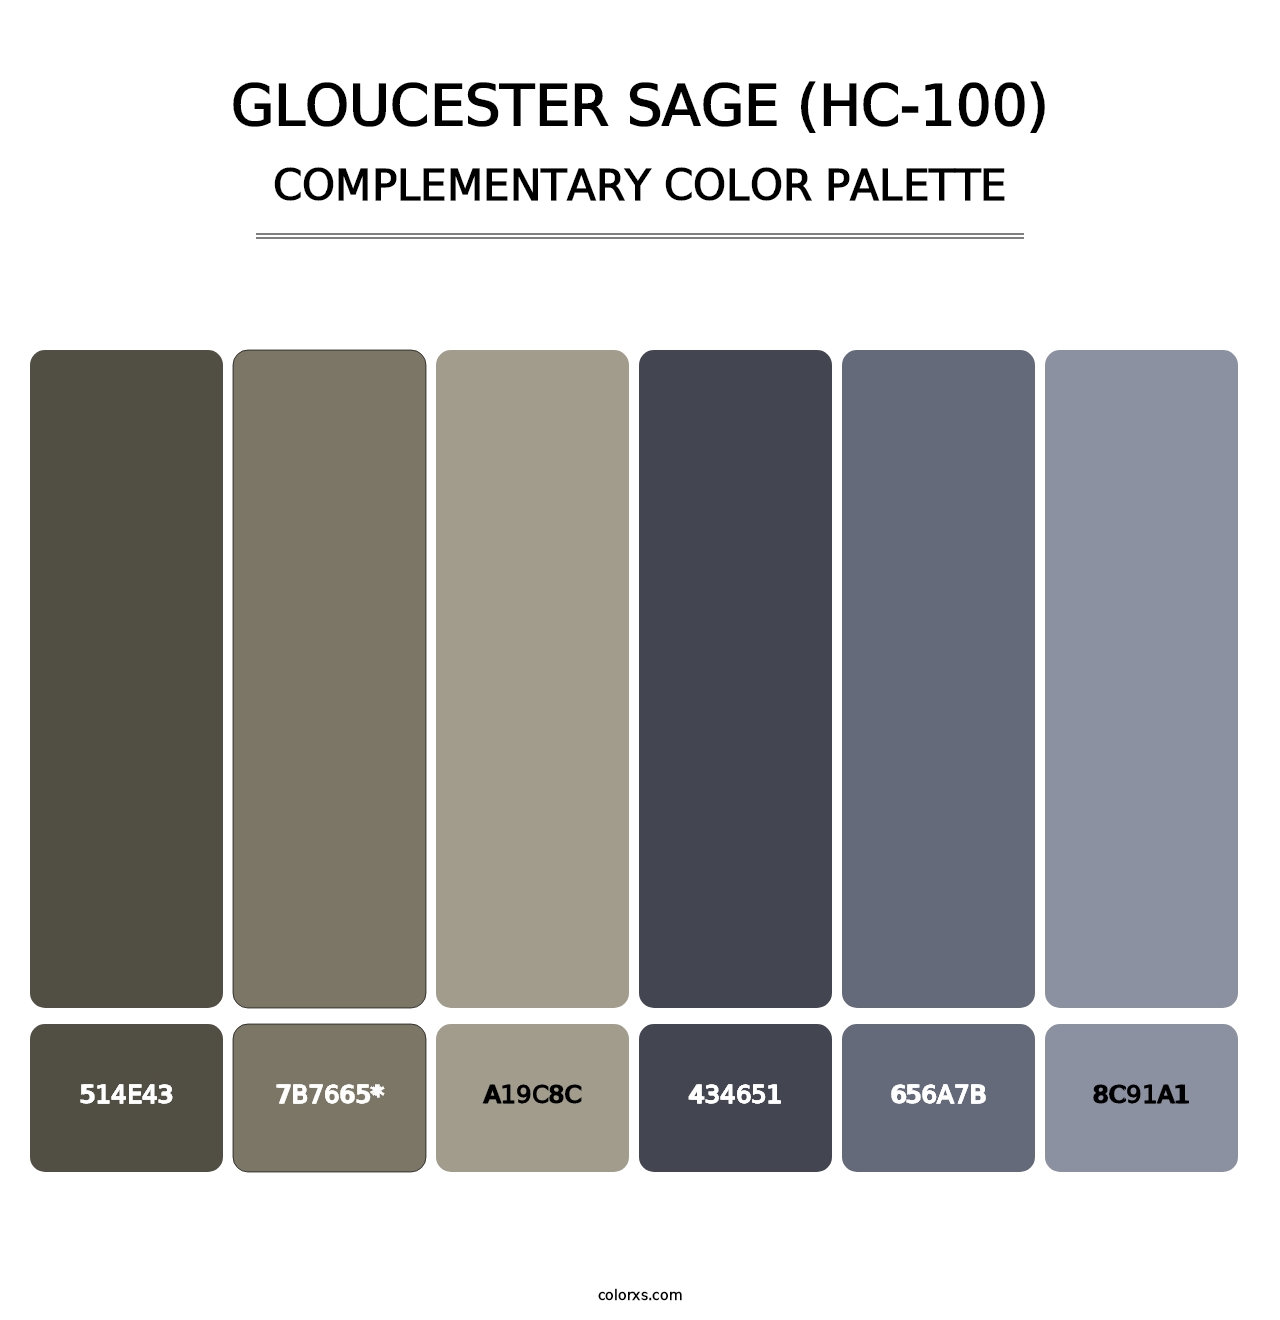 Gloucester Sage (HC-100) - Complementary Color Palette